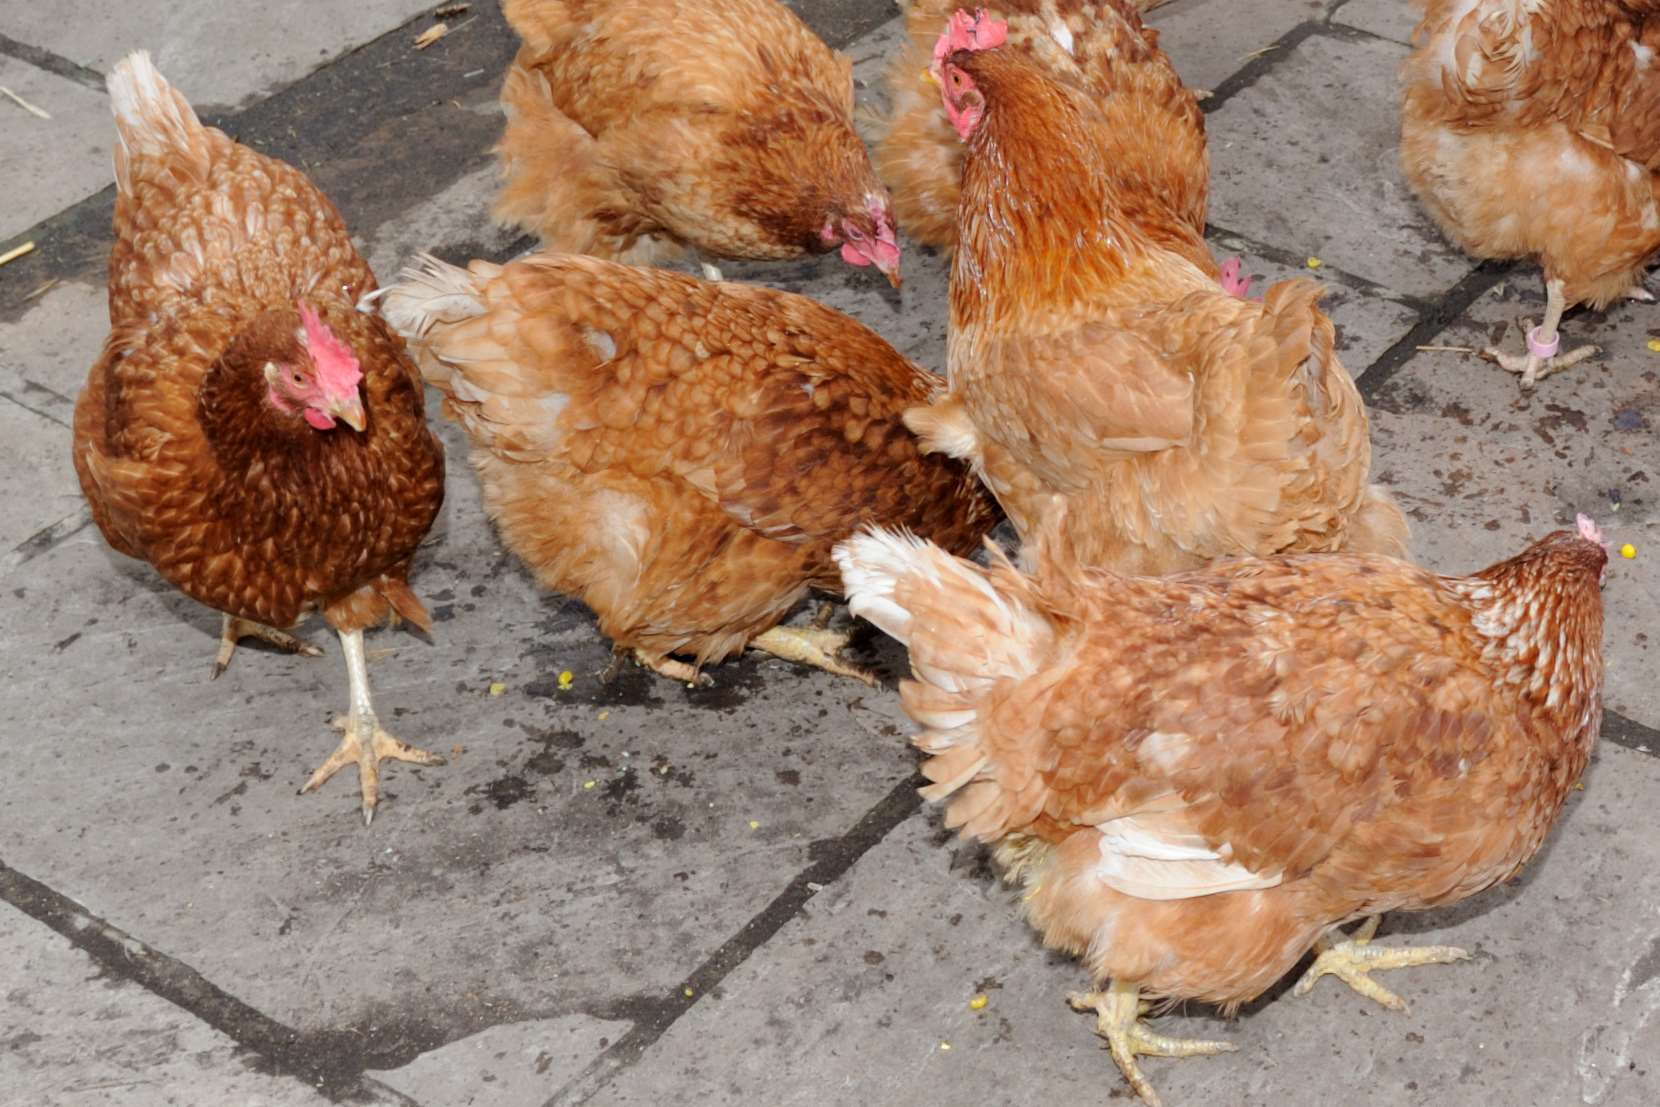 Poultry owners have been advised to keep their birds inside until the end of February